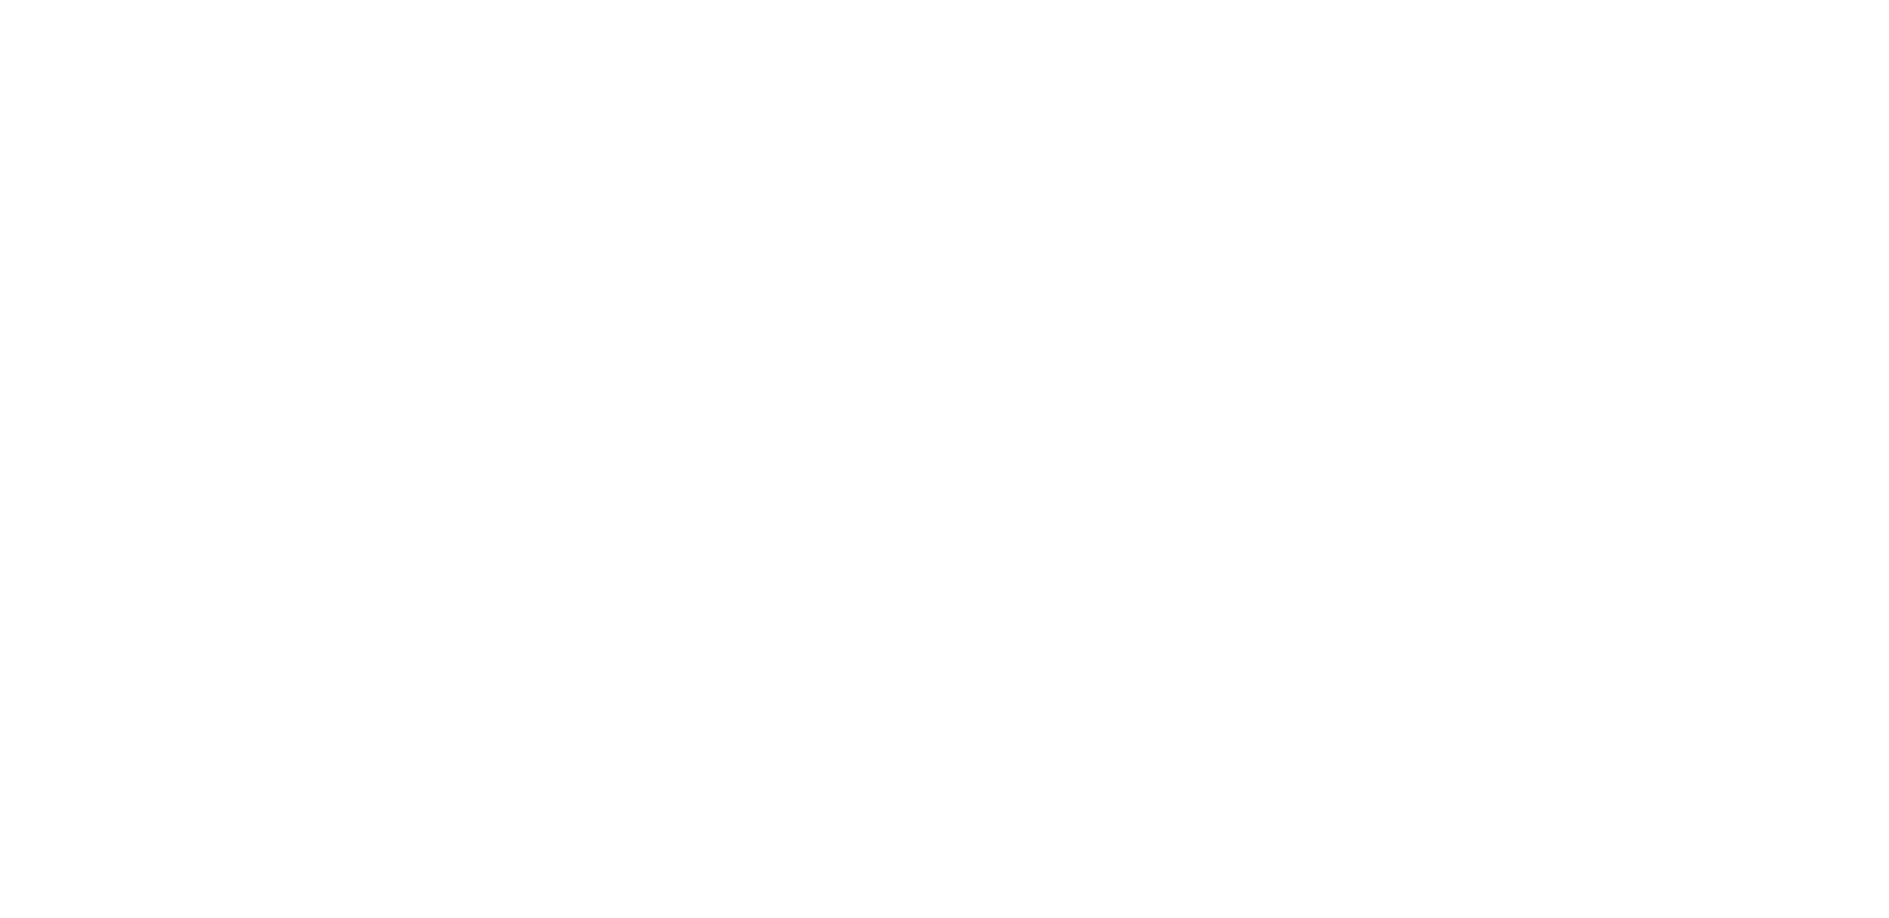 Klaassen Cycles - cycles with character, performance and style